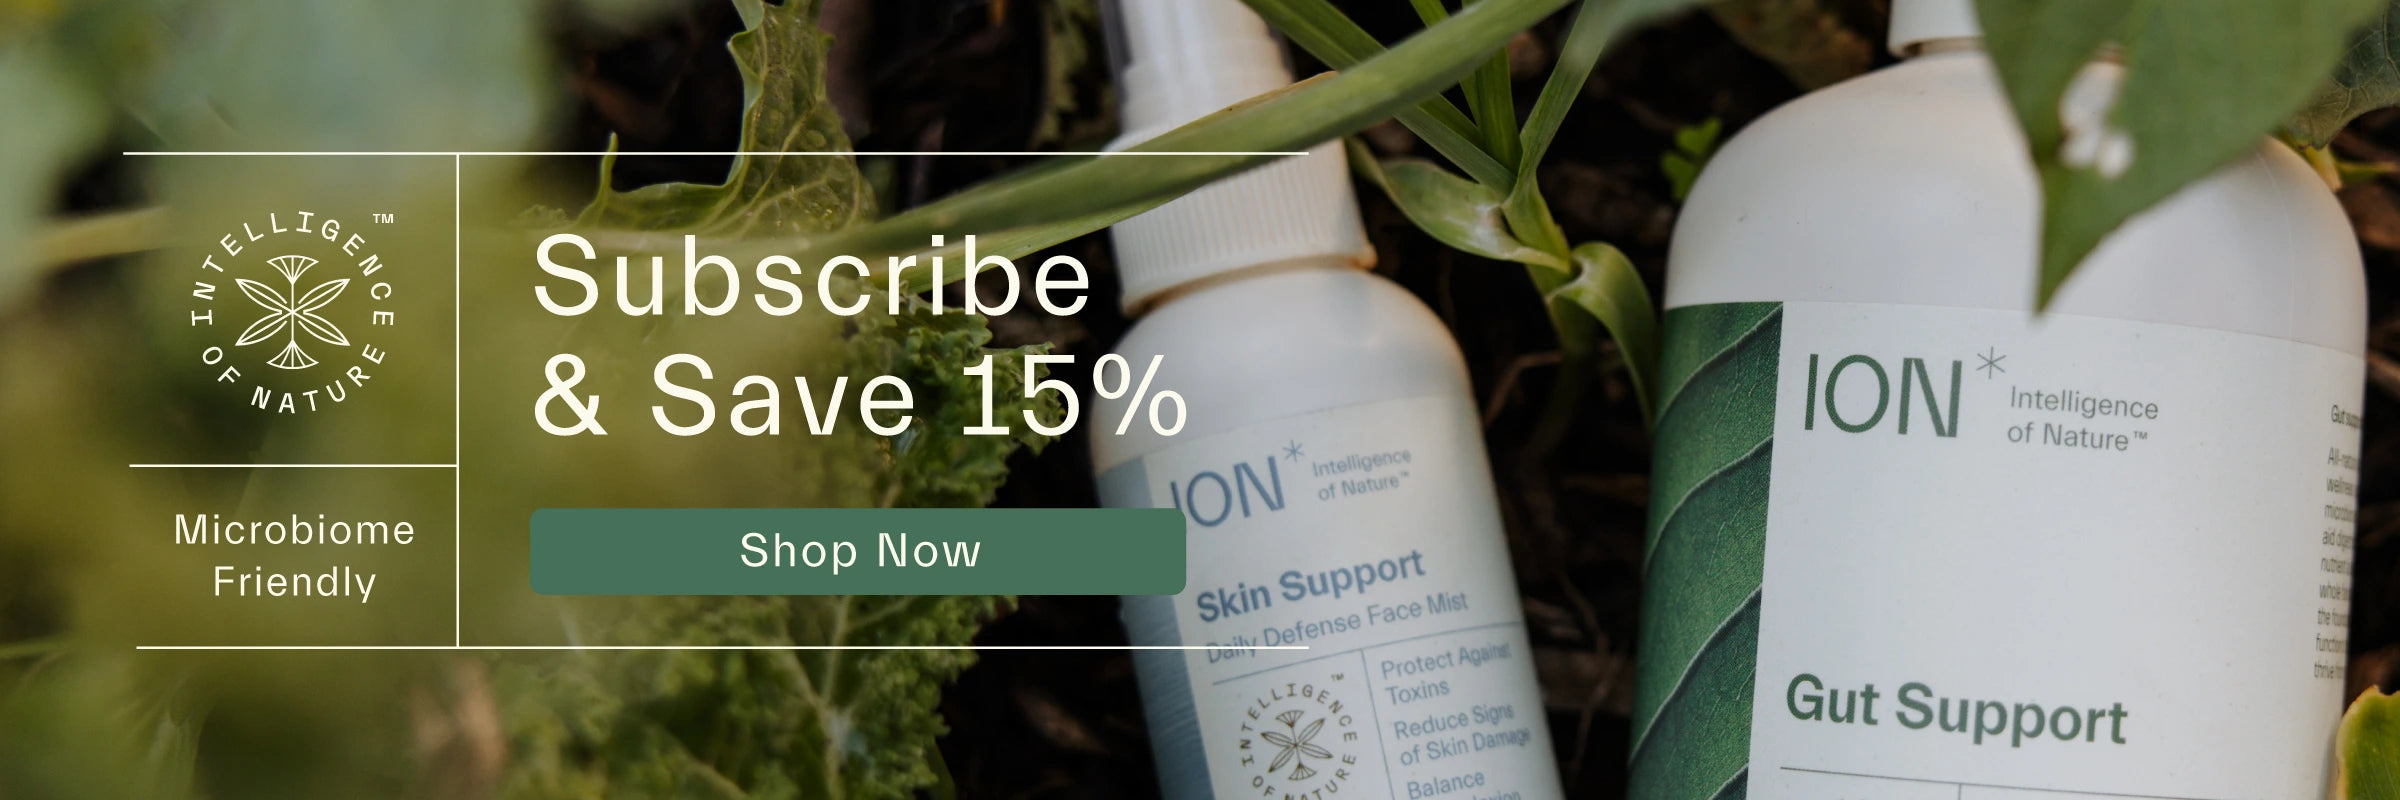 Save 15% with an ION* Subscription